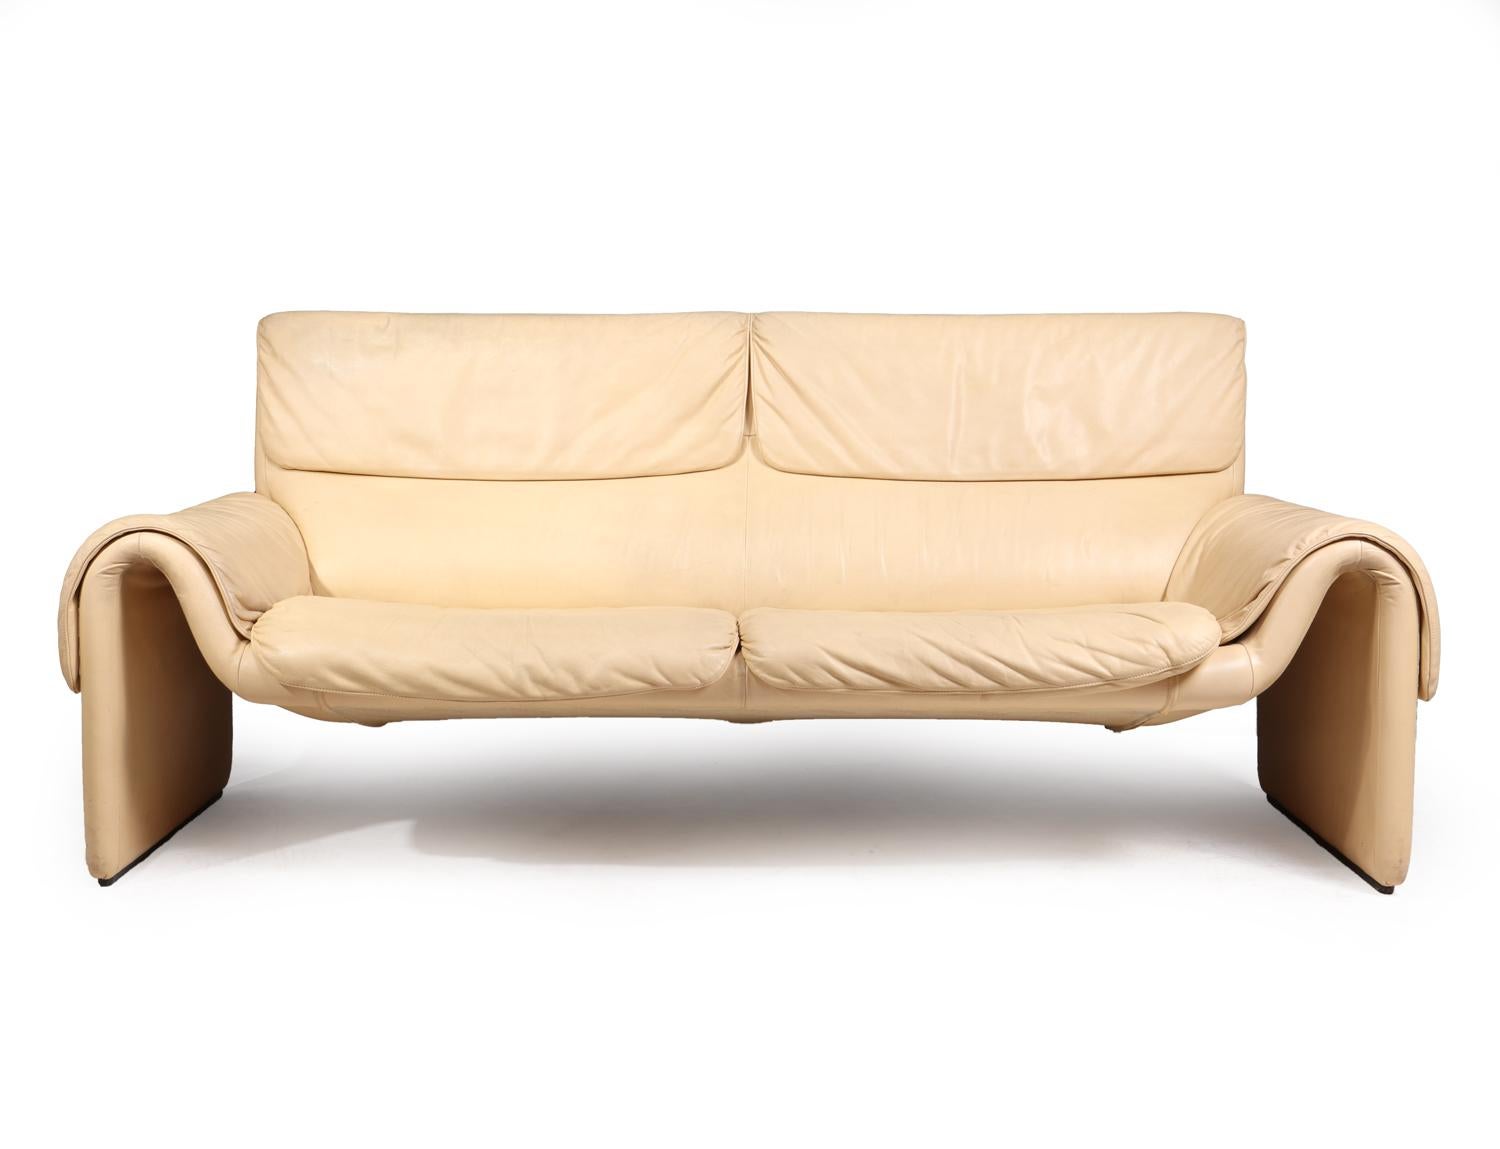 Leather sofa by De Sede DS-2011, circa 1980.
A cream leather model DS-2011 sofa produced in Switzerland in the 1980s this has a steel frame and cream leather upholstery.

Age: 1980

Style: Mid-Century Modern

Material: Steel and